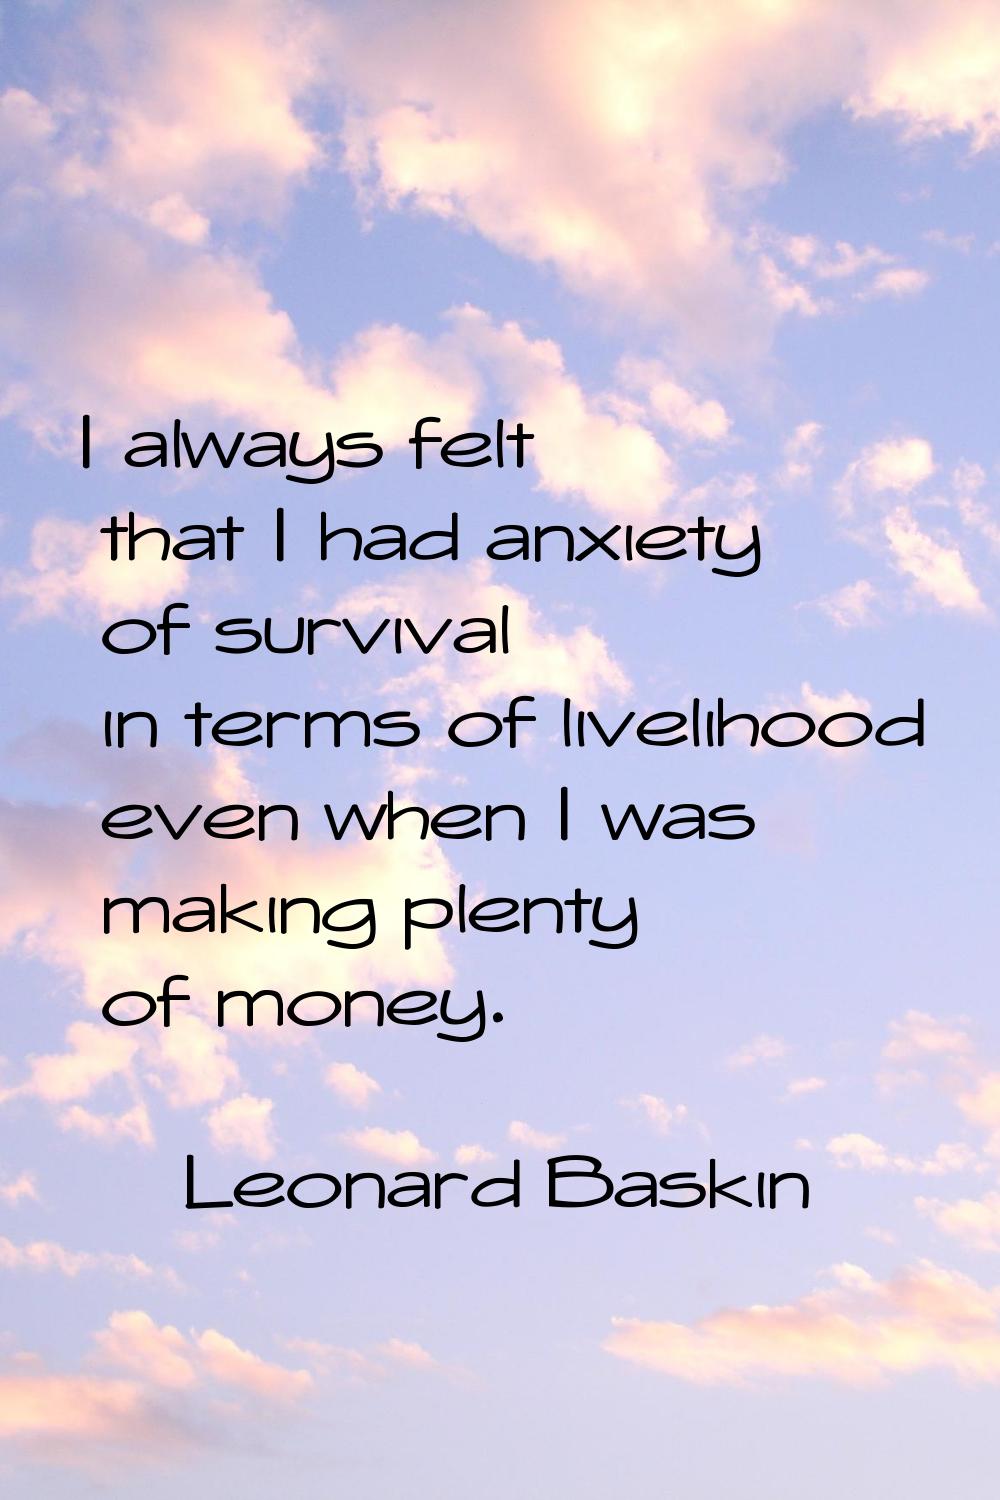 I always felt that I had anxiety of survival in terms of livelihood even when I was making plenty o